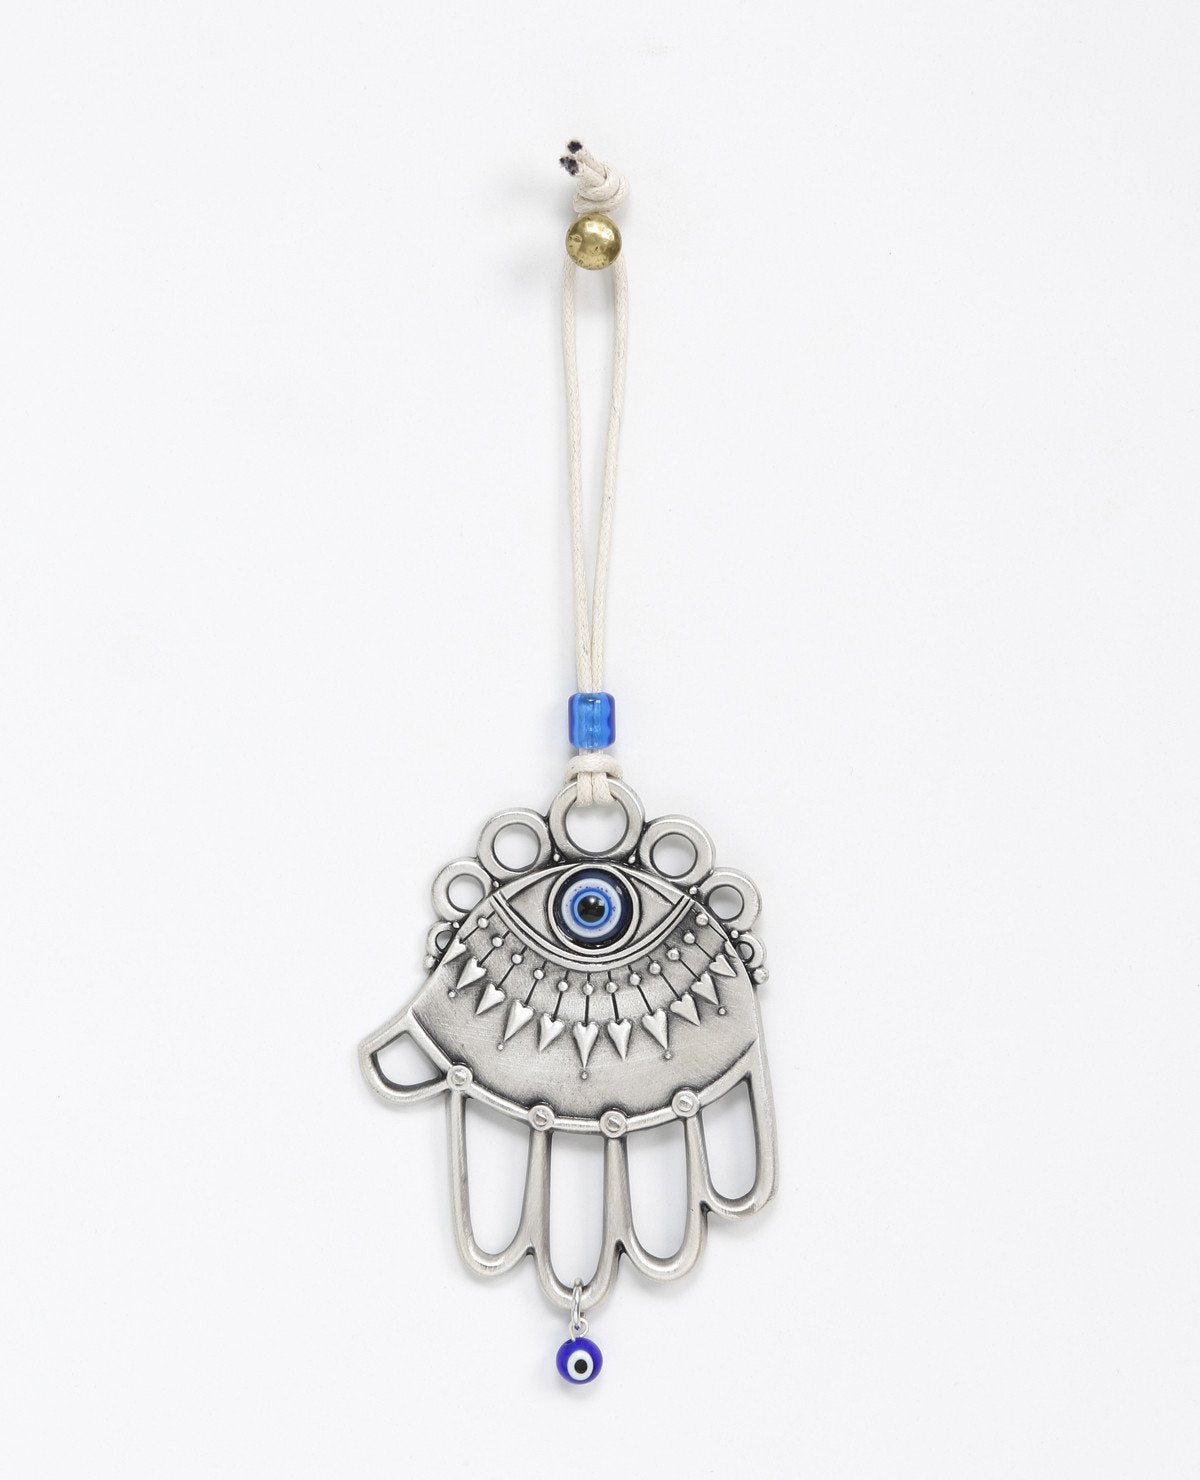 A one of a kind hanging Hamsa ornament. It is designed with a combination of different styles, some of which are hollow, while others are solid decorated surfaces. Embedded at the top of the Hamsa is a large blue eye, decorated by a lower eyelash in the shape of heart arrows. The fingers of the Hamsa are hollow and at their bottom hangs a small blue eye. The ornament is coated in sterling silver and comes with a faux leather string for hanging, decorated by a blue bead. 
The blue eye is considered a charm a